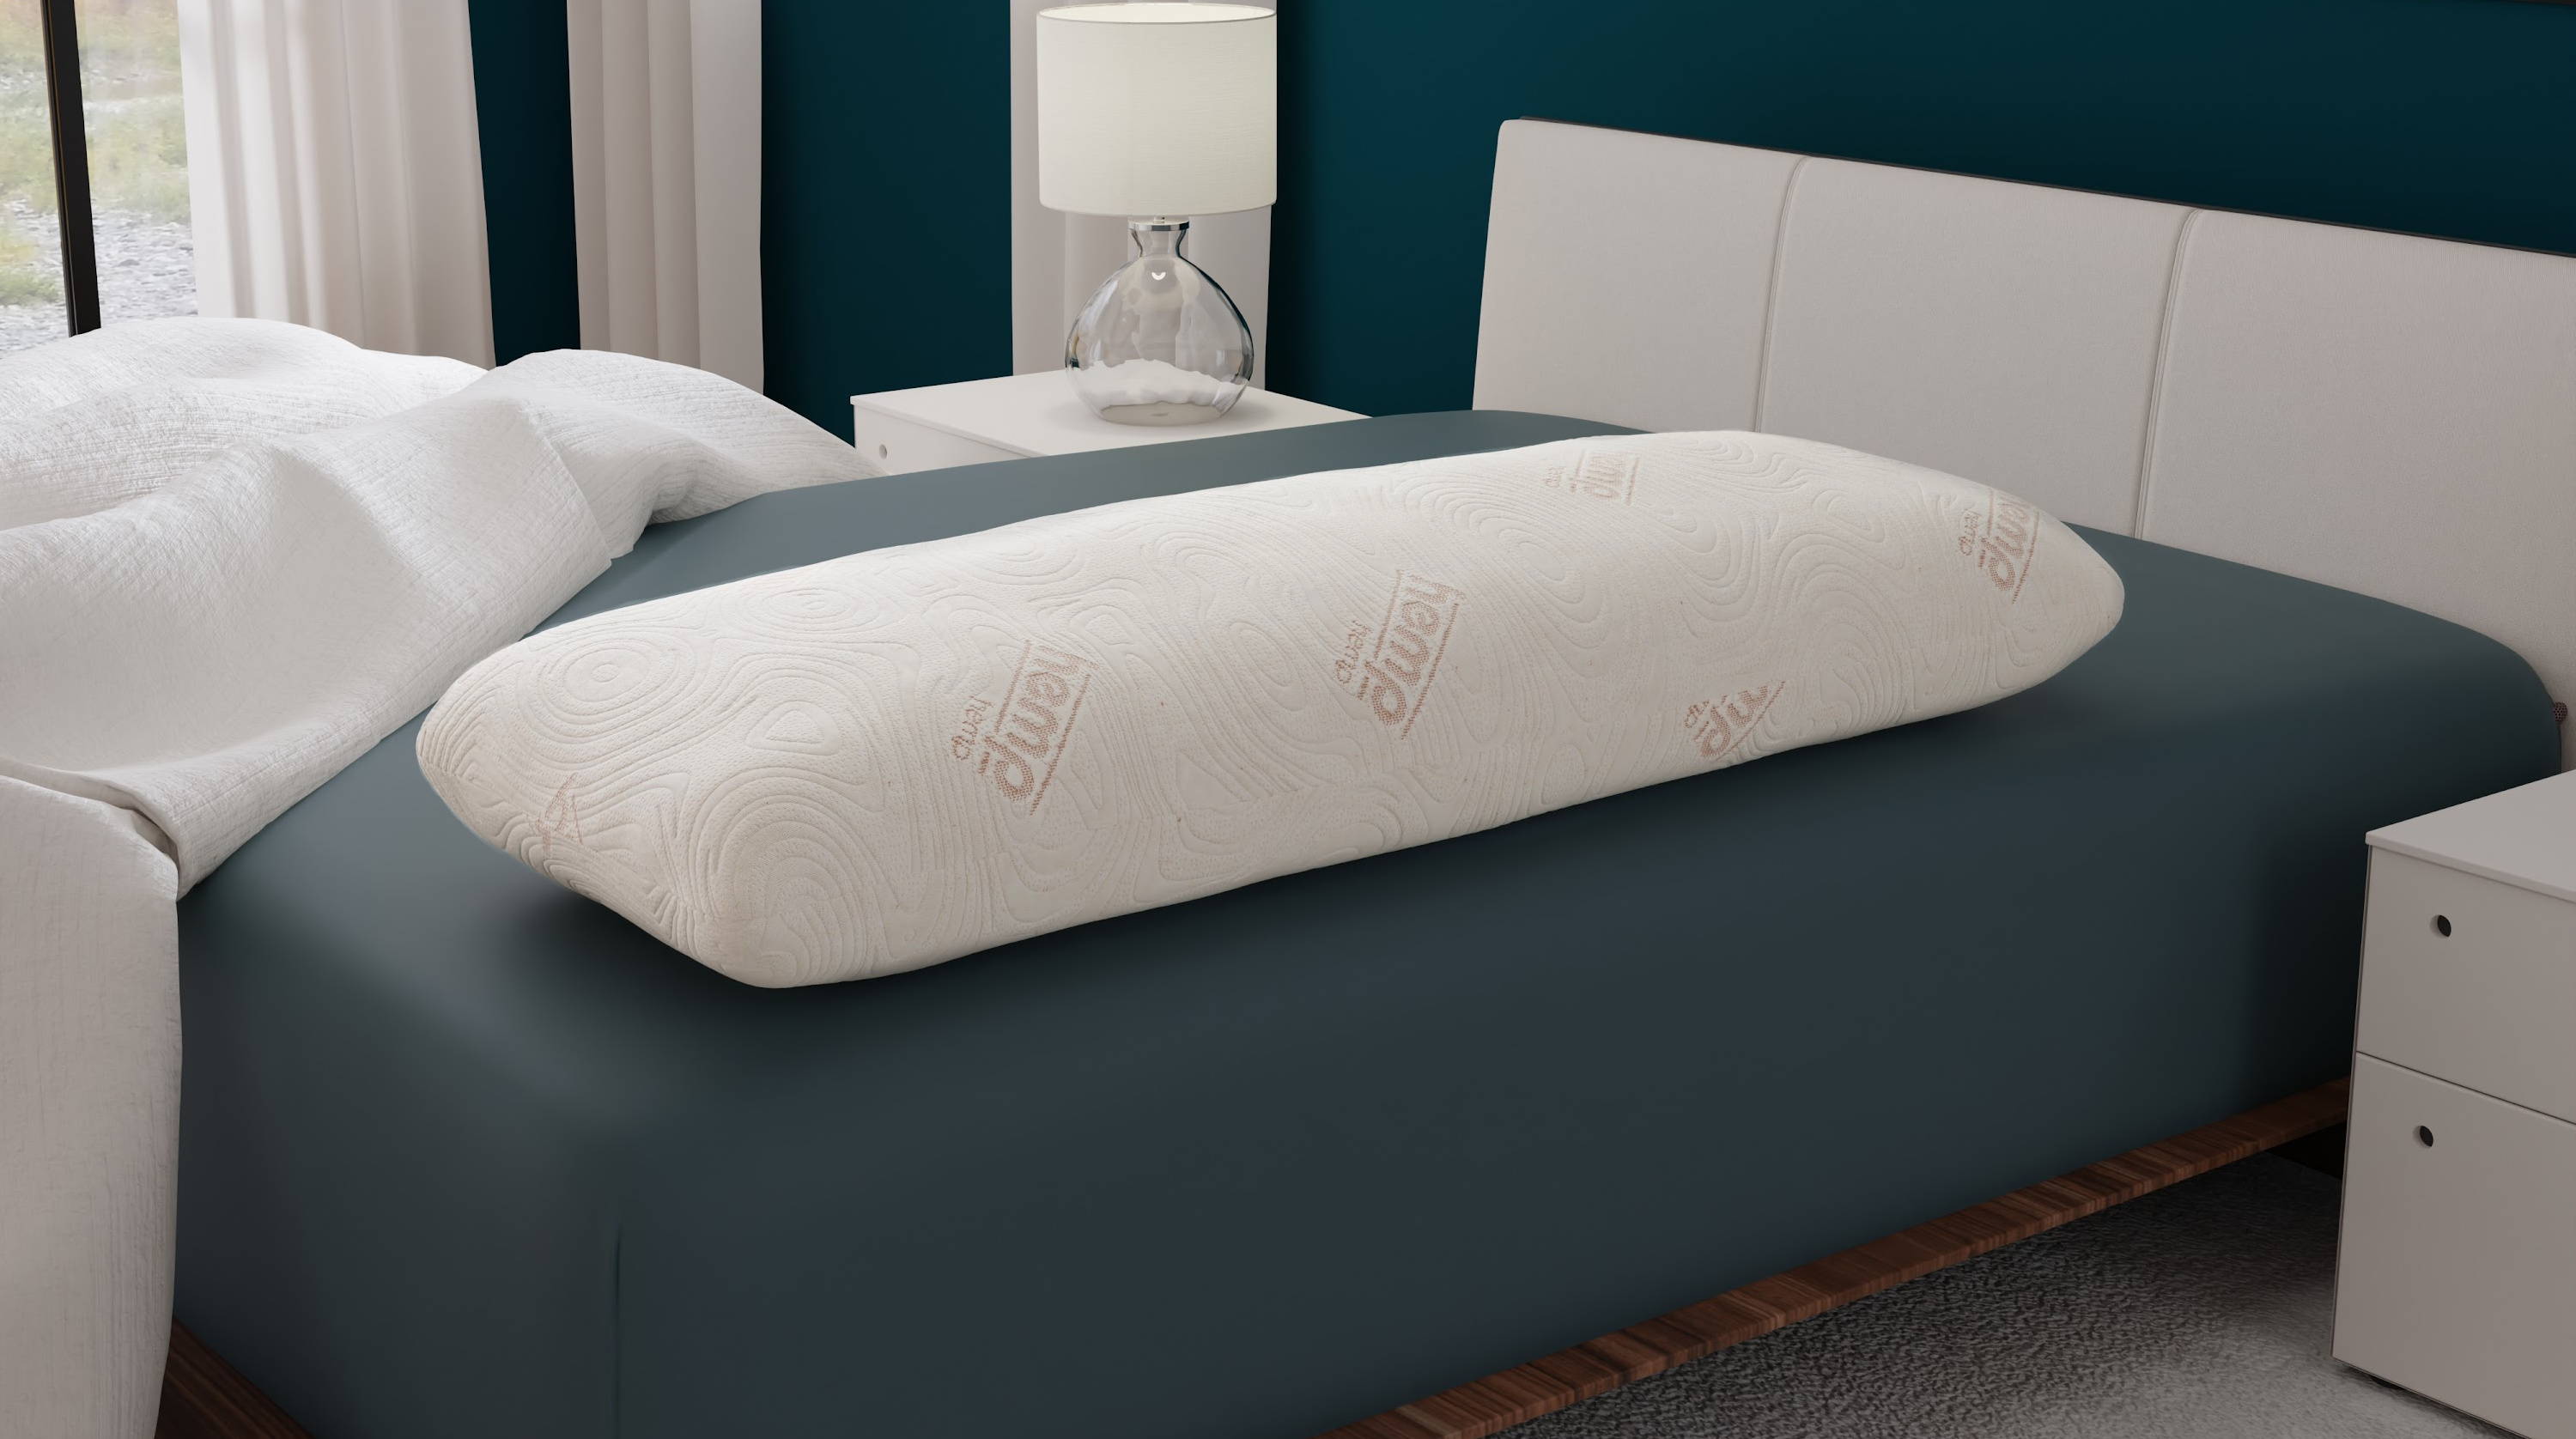 CBD and copper infused gel memory foam body pillow laying down longwise on a bed with a teal sheet.